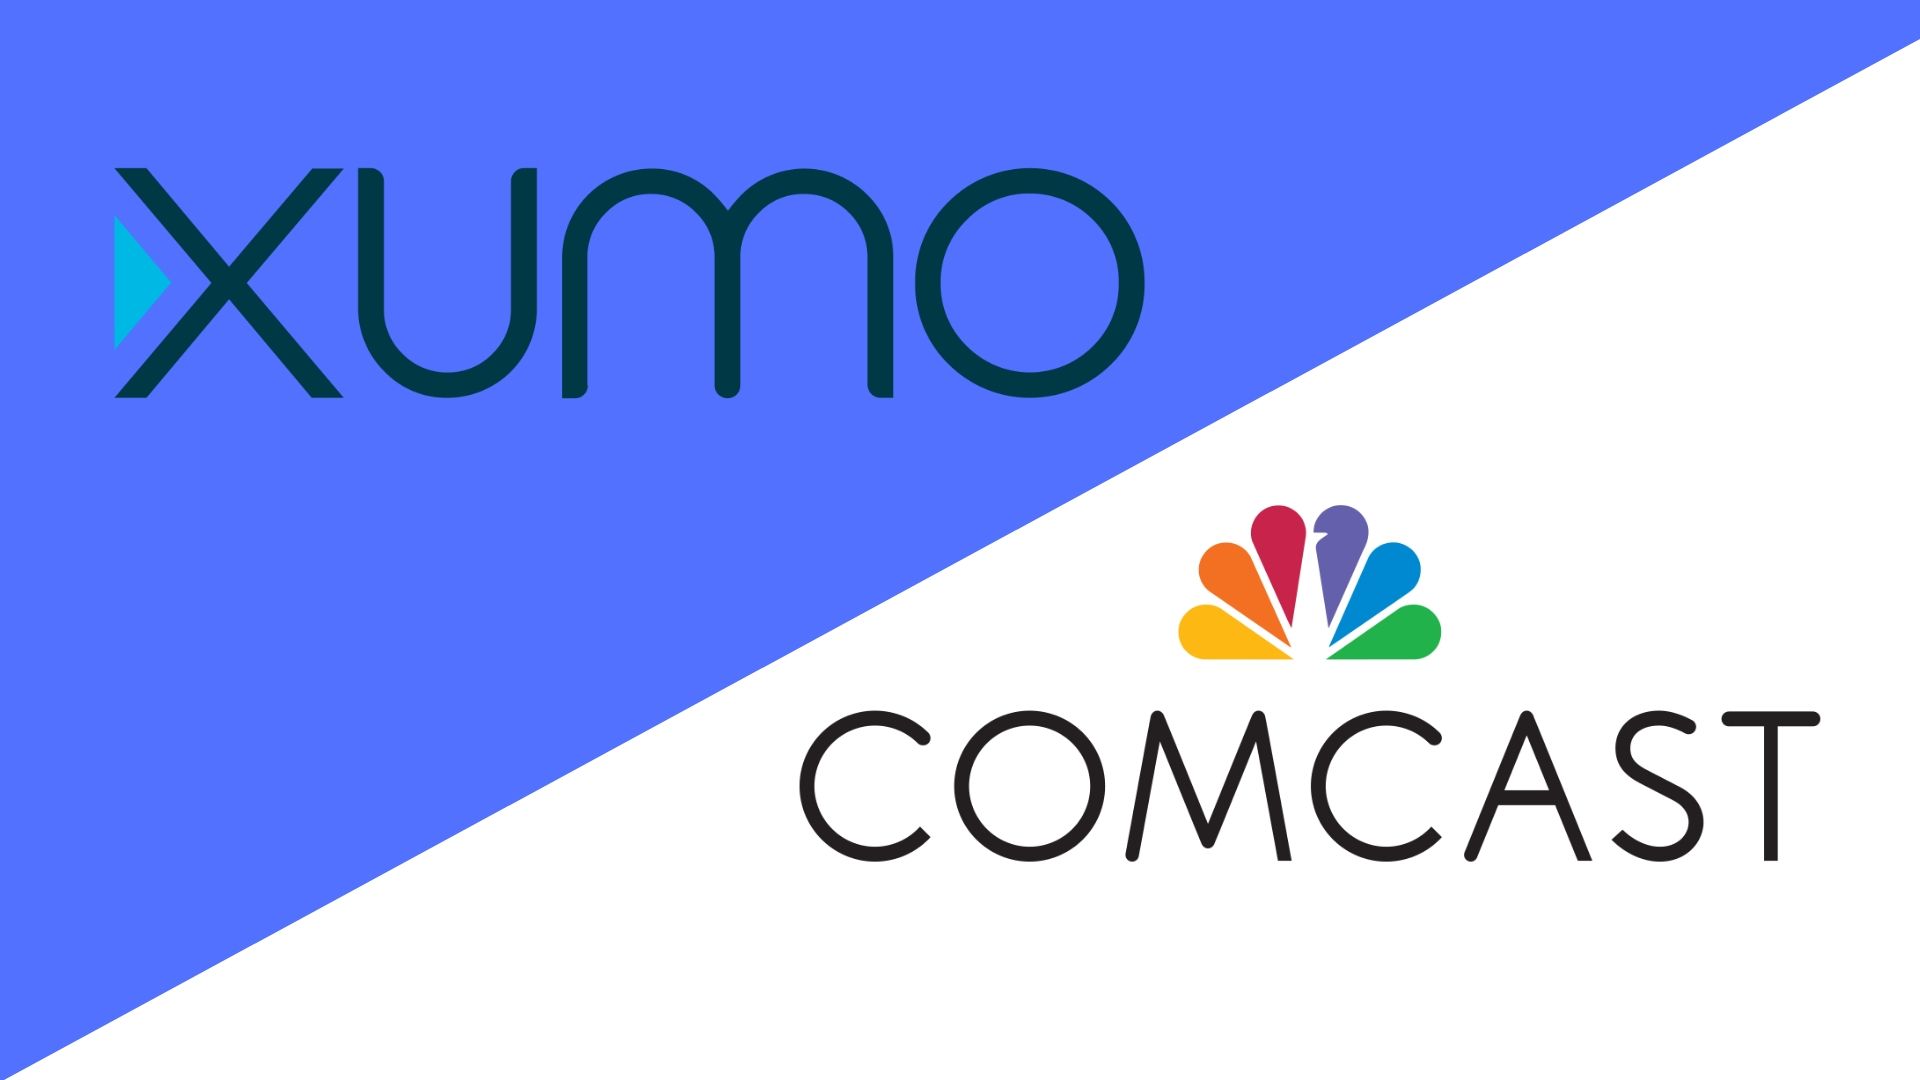 Comcast acquires Xumo and other top news